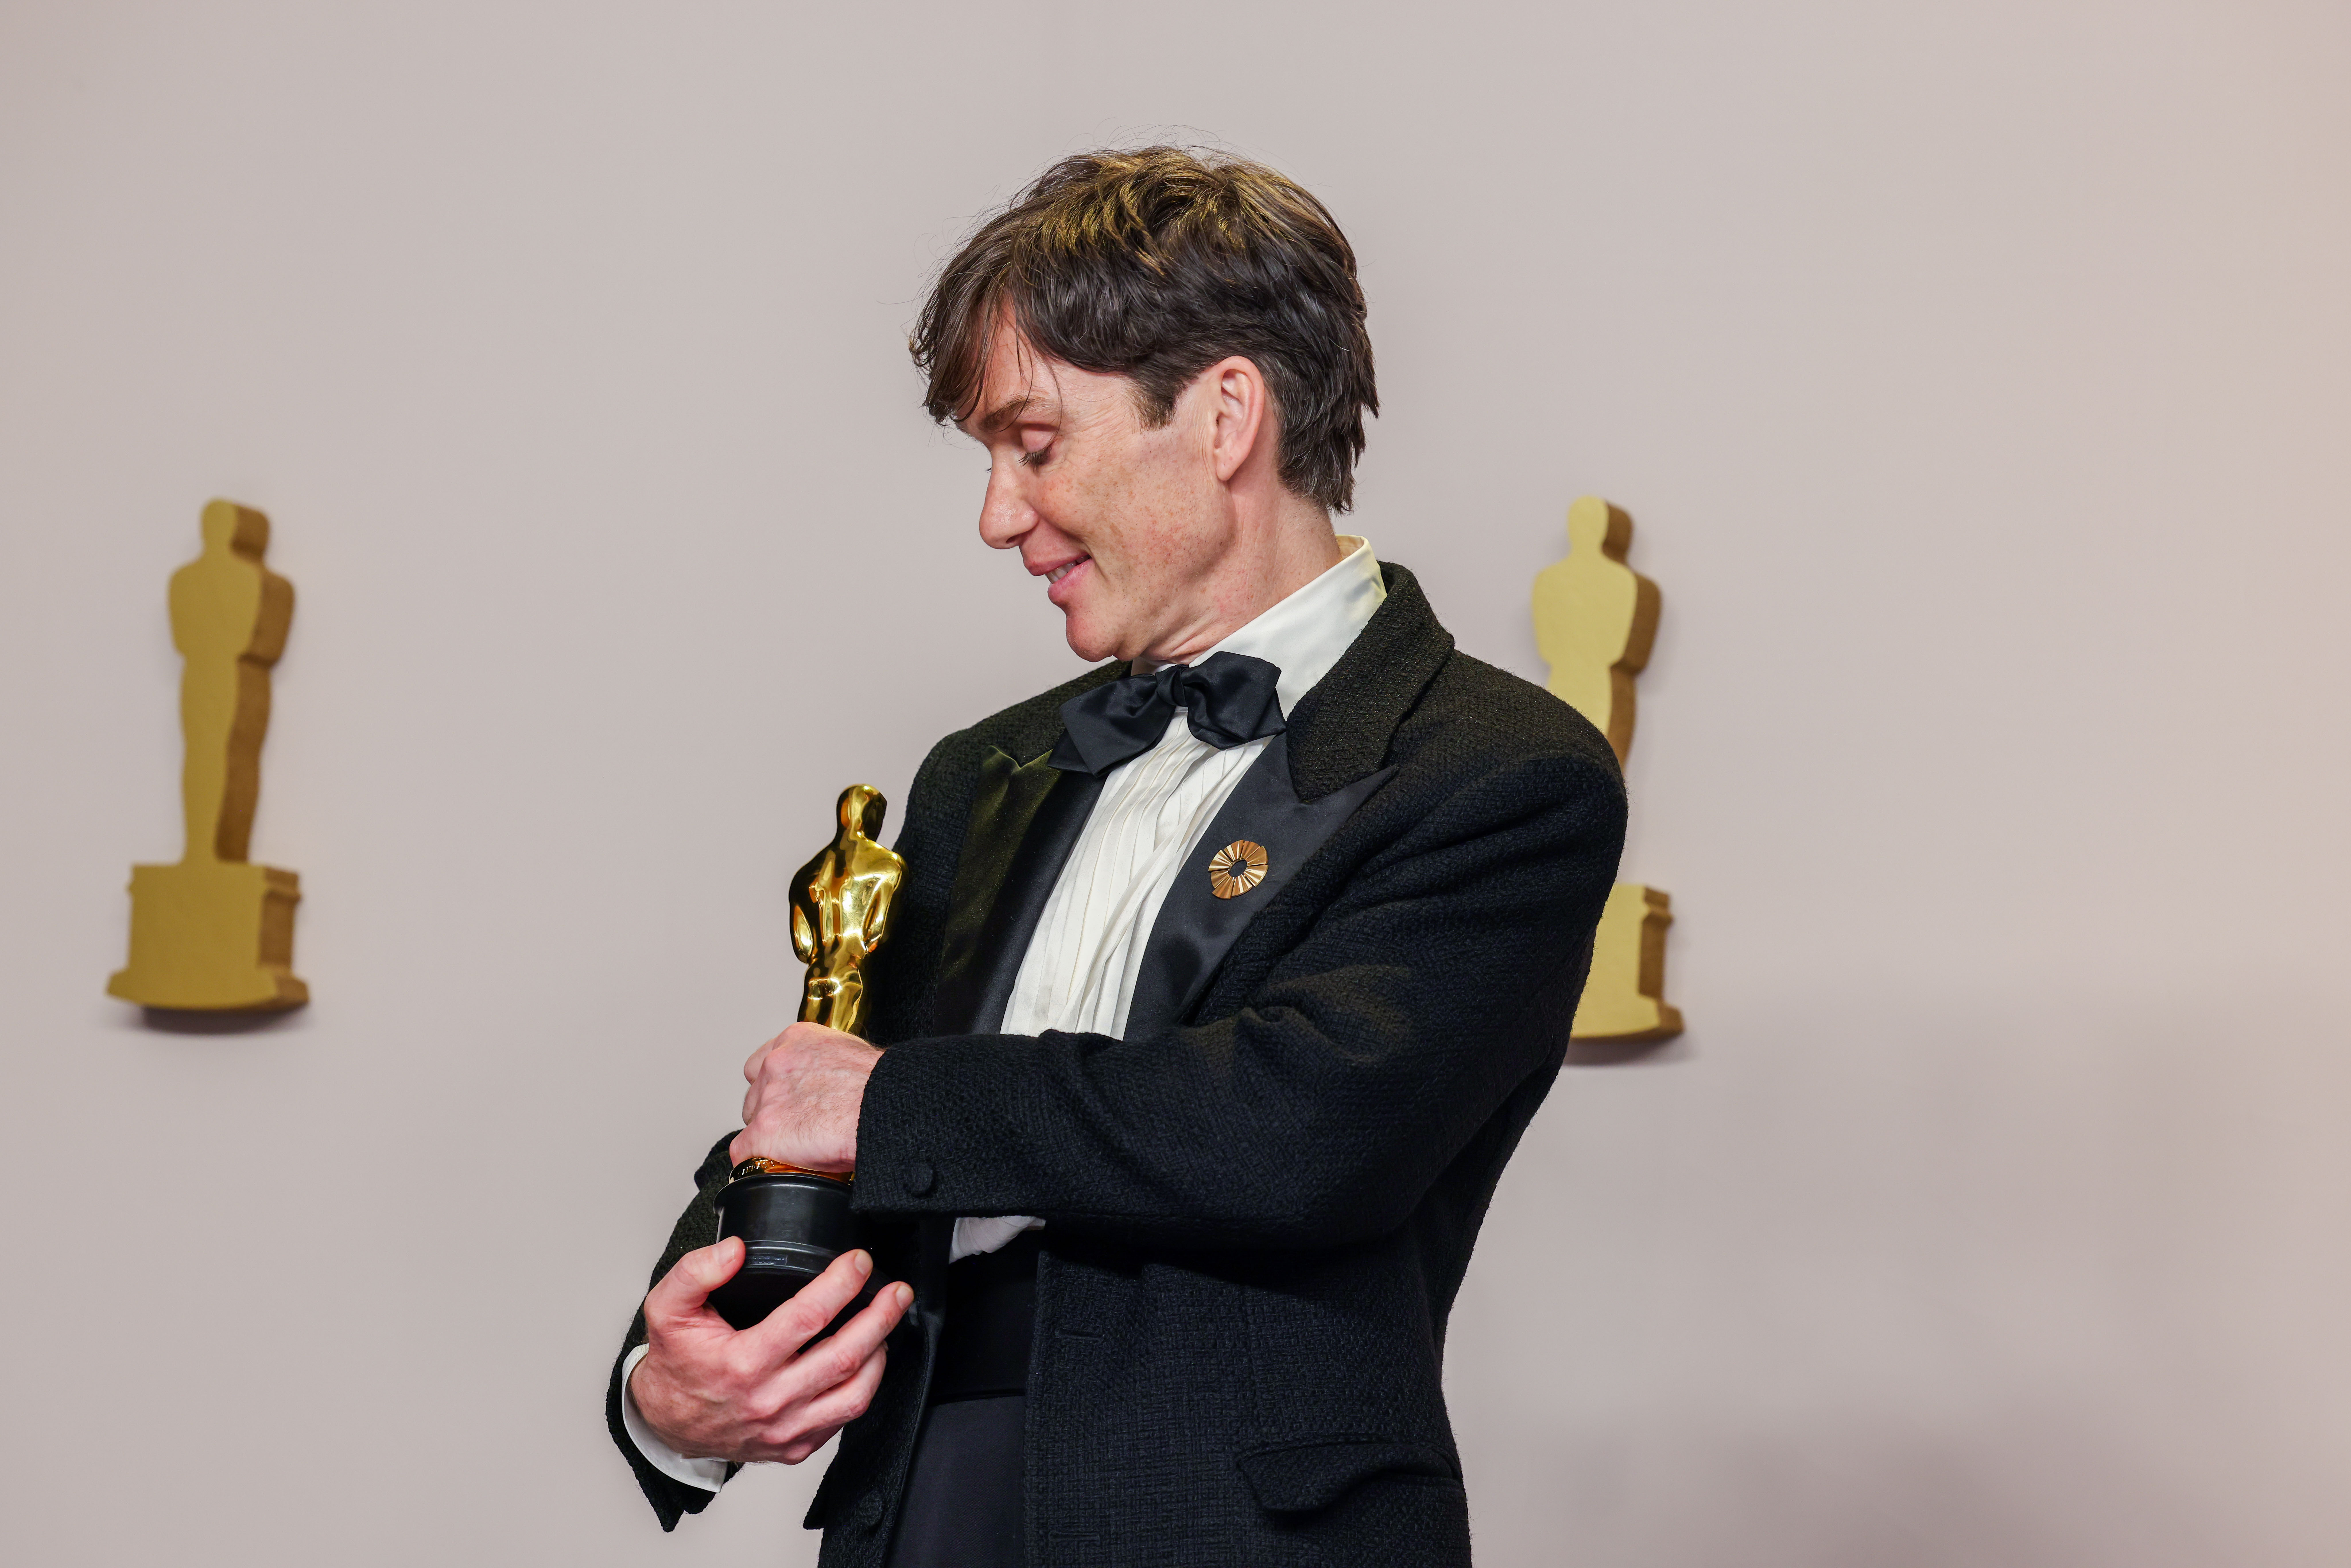 Irish actor Cillian Murphy looks at his Oscar while posing for photos in the press room at the 96th Annual Academy Awards in Hollywood, California on March 10, 2024. | Source: Getty Images